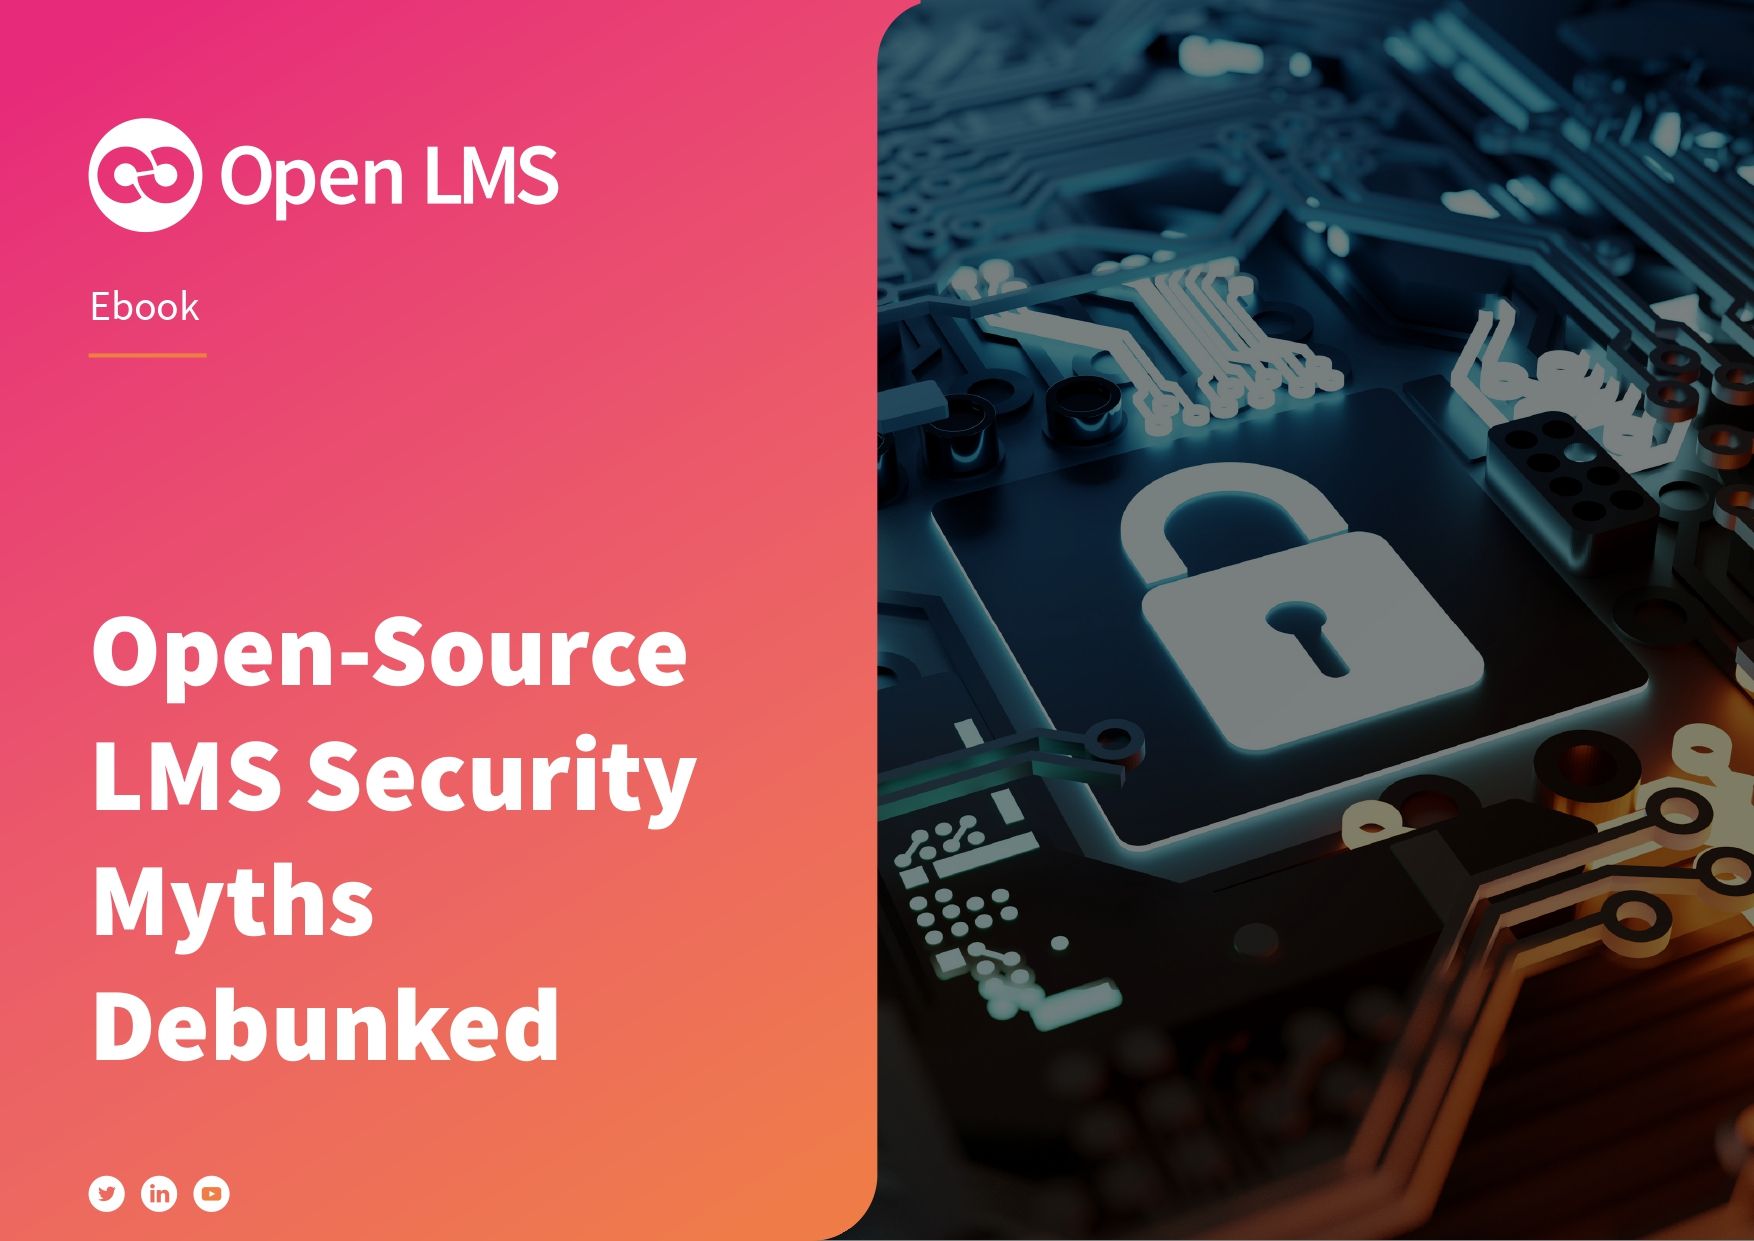 Open-Source LMS Security Myths Debunked